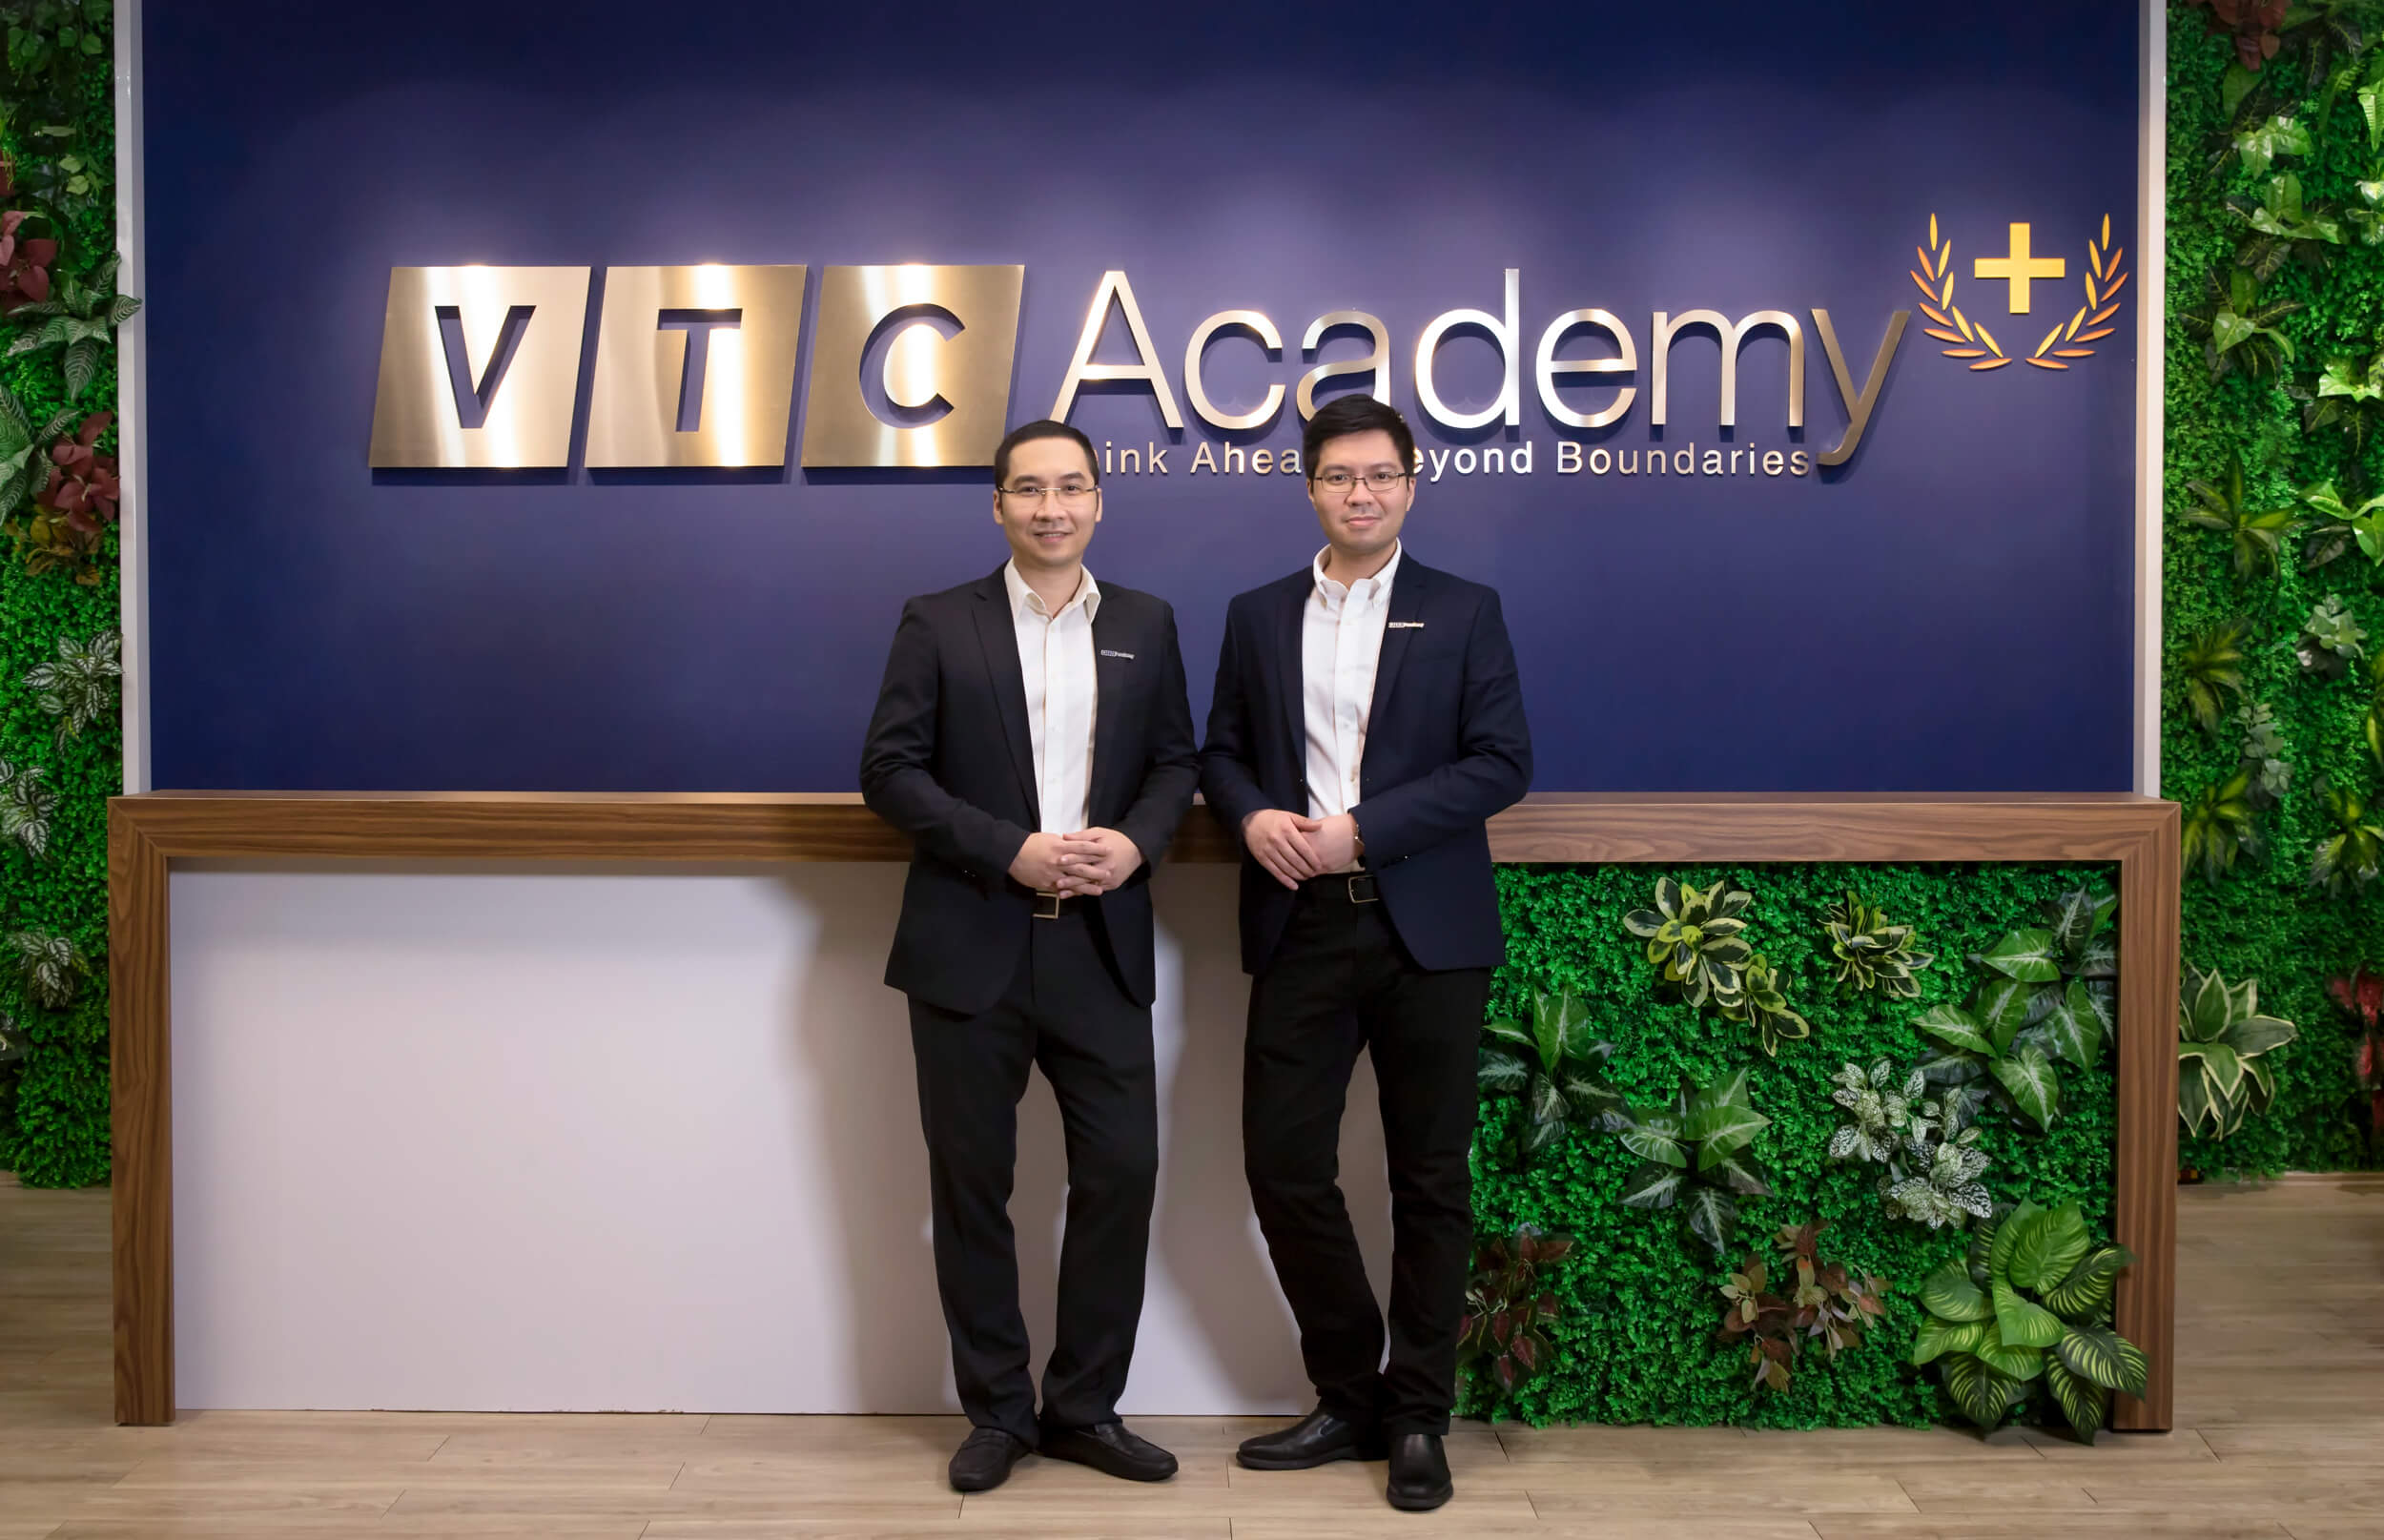 VTC Academy Aims to Raise 20 Million USD for the Development Plan of a Digital Academic Ecosystem in the Information Technology and Design Industry